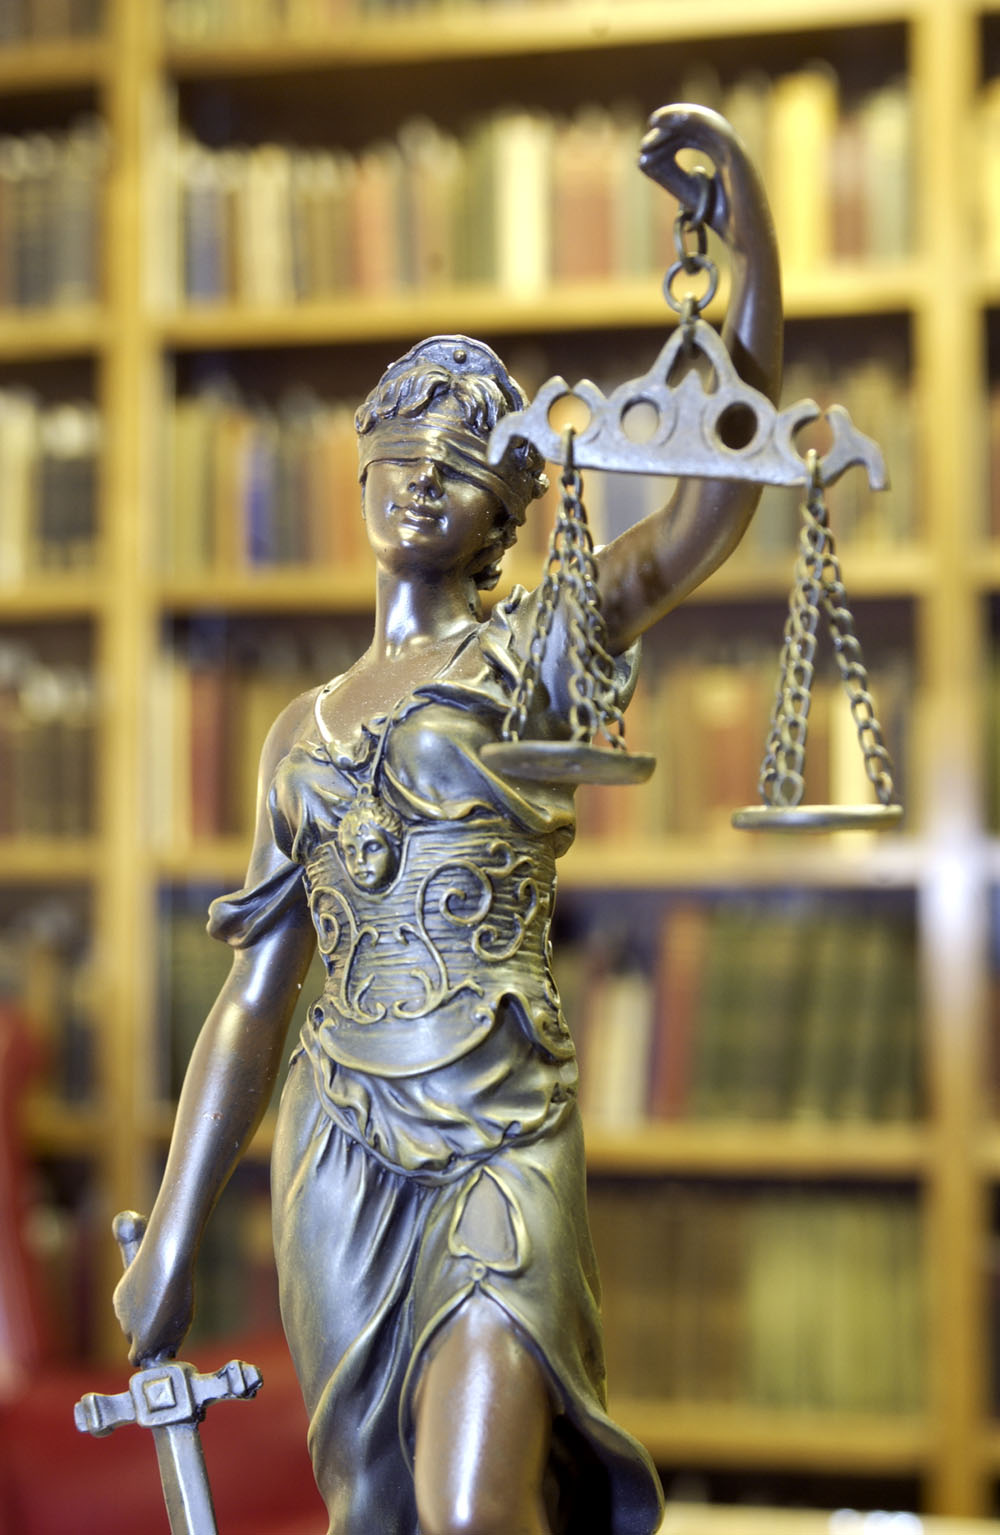 Scales of Justice statue.